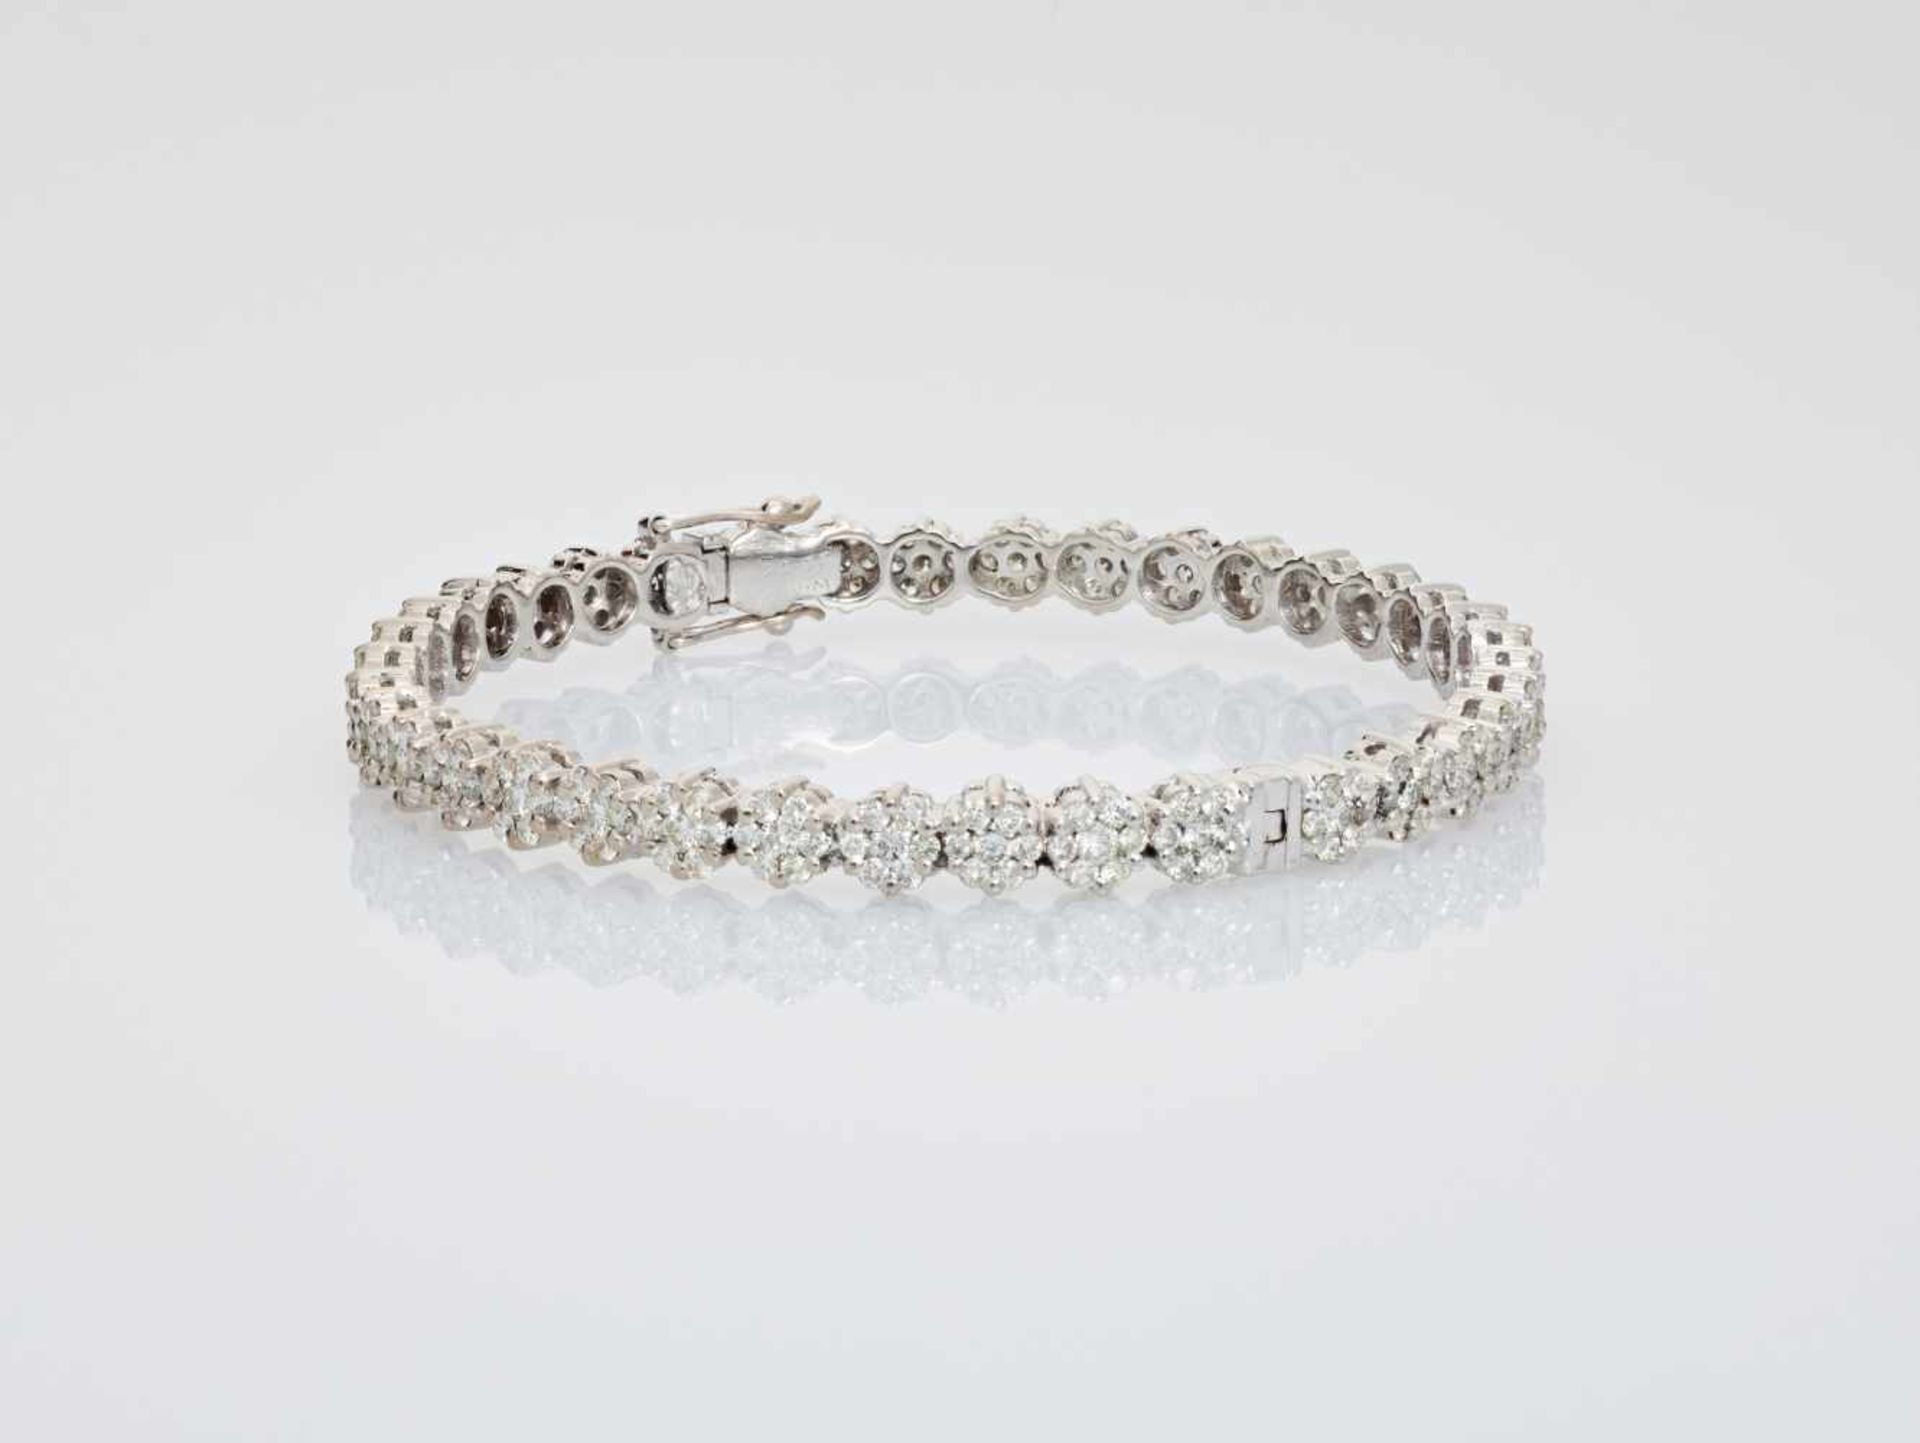 AN 18 CARAT GOLD BRACELET WITH 10 CARAT DIAMONDSHallmarked 18K and inscribed with the stone weight